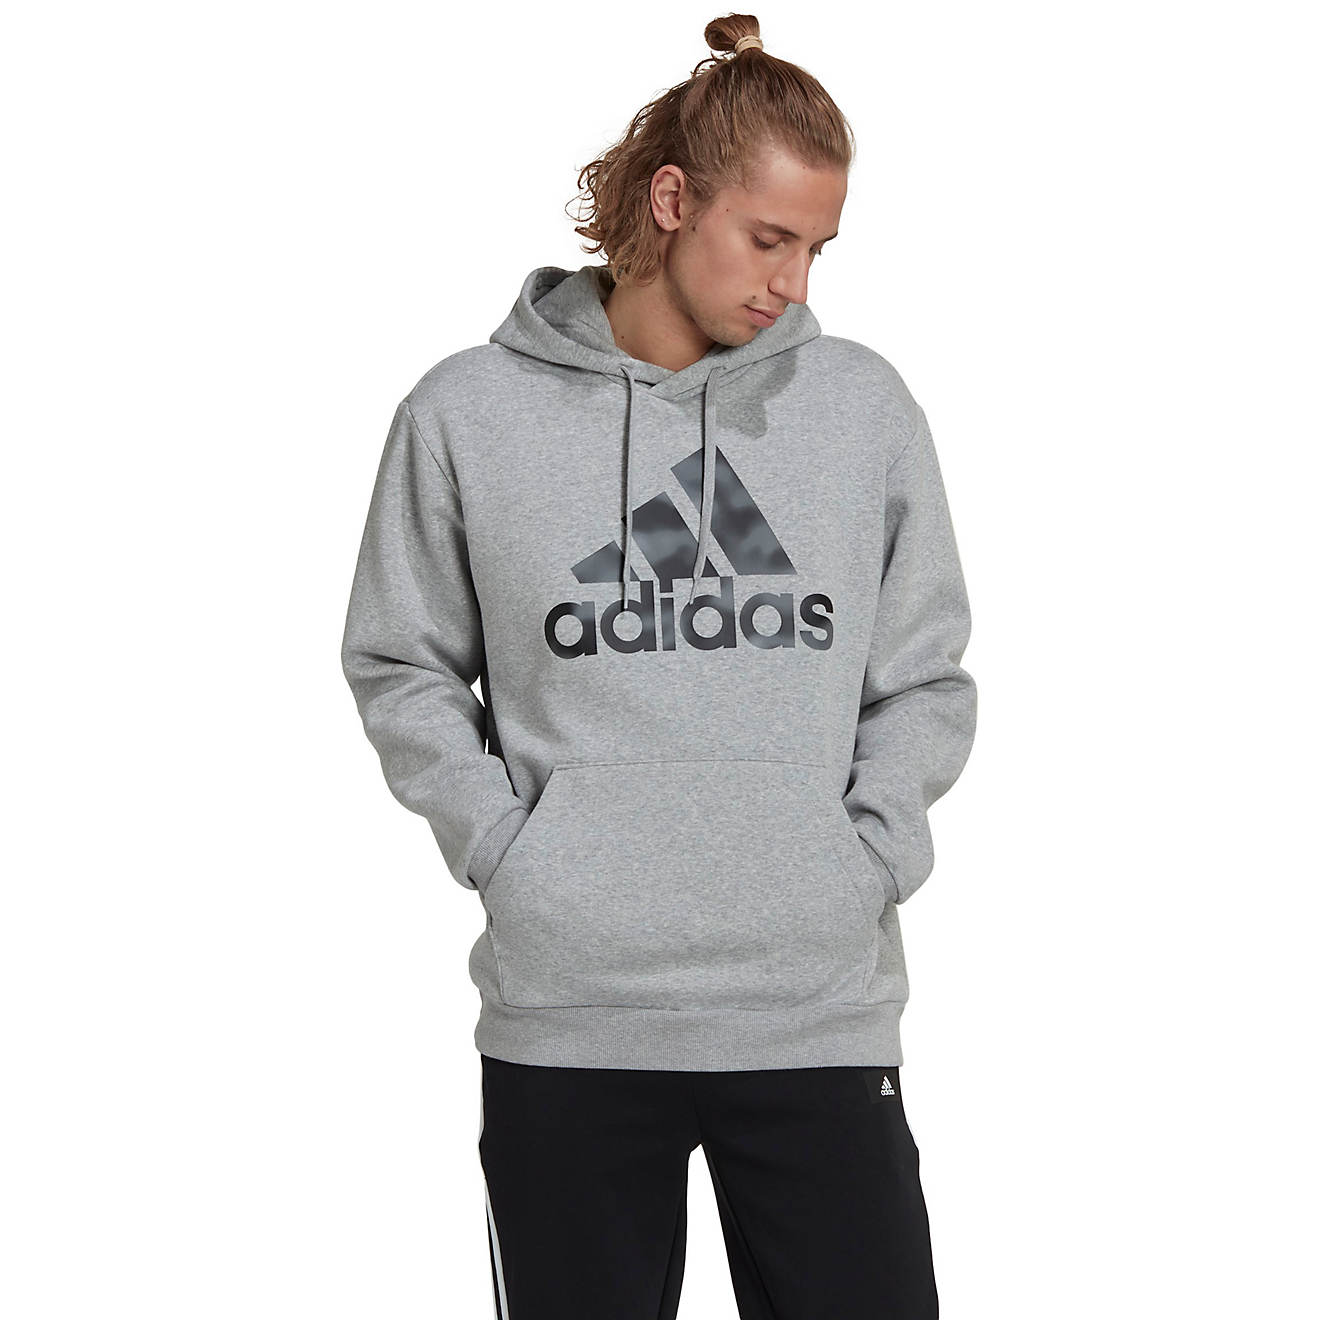 adidas Men's Camo Hoodie | Free Shipping at Academy